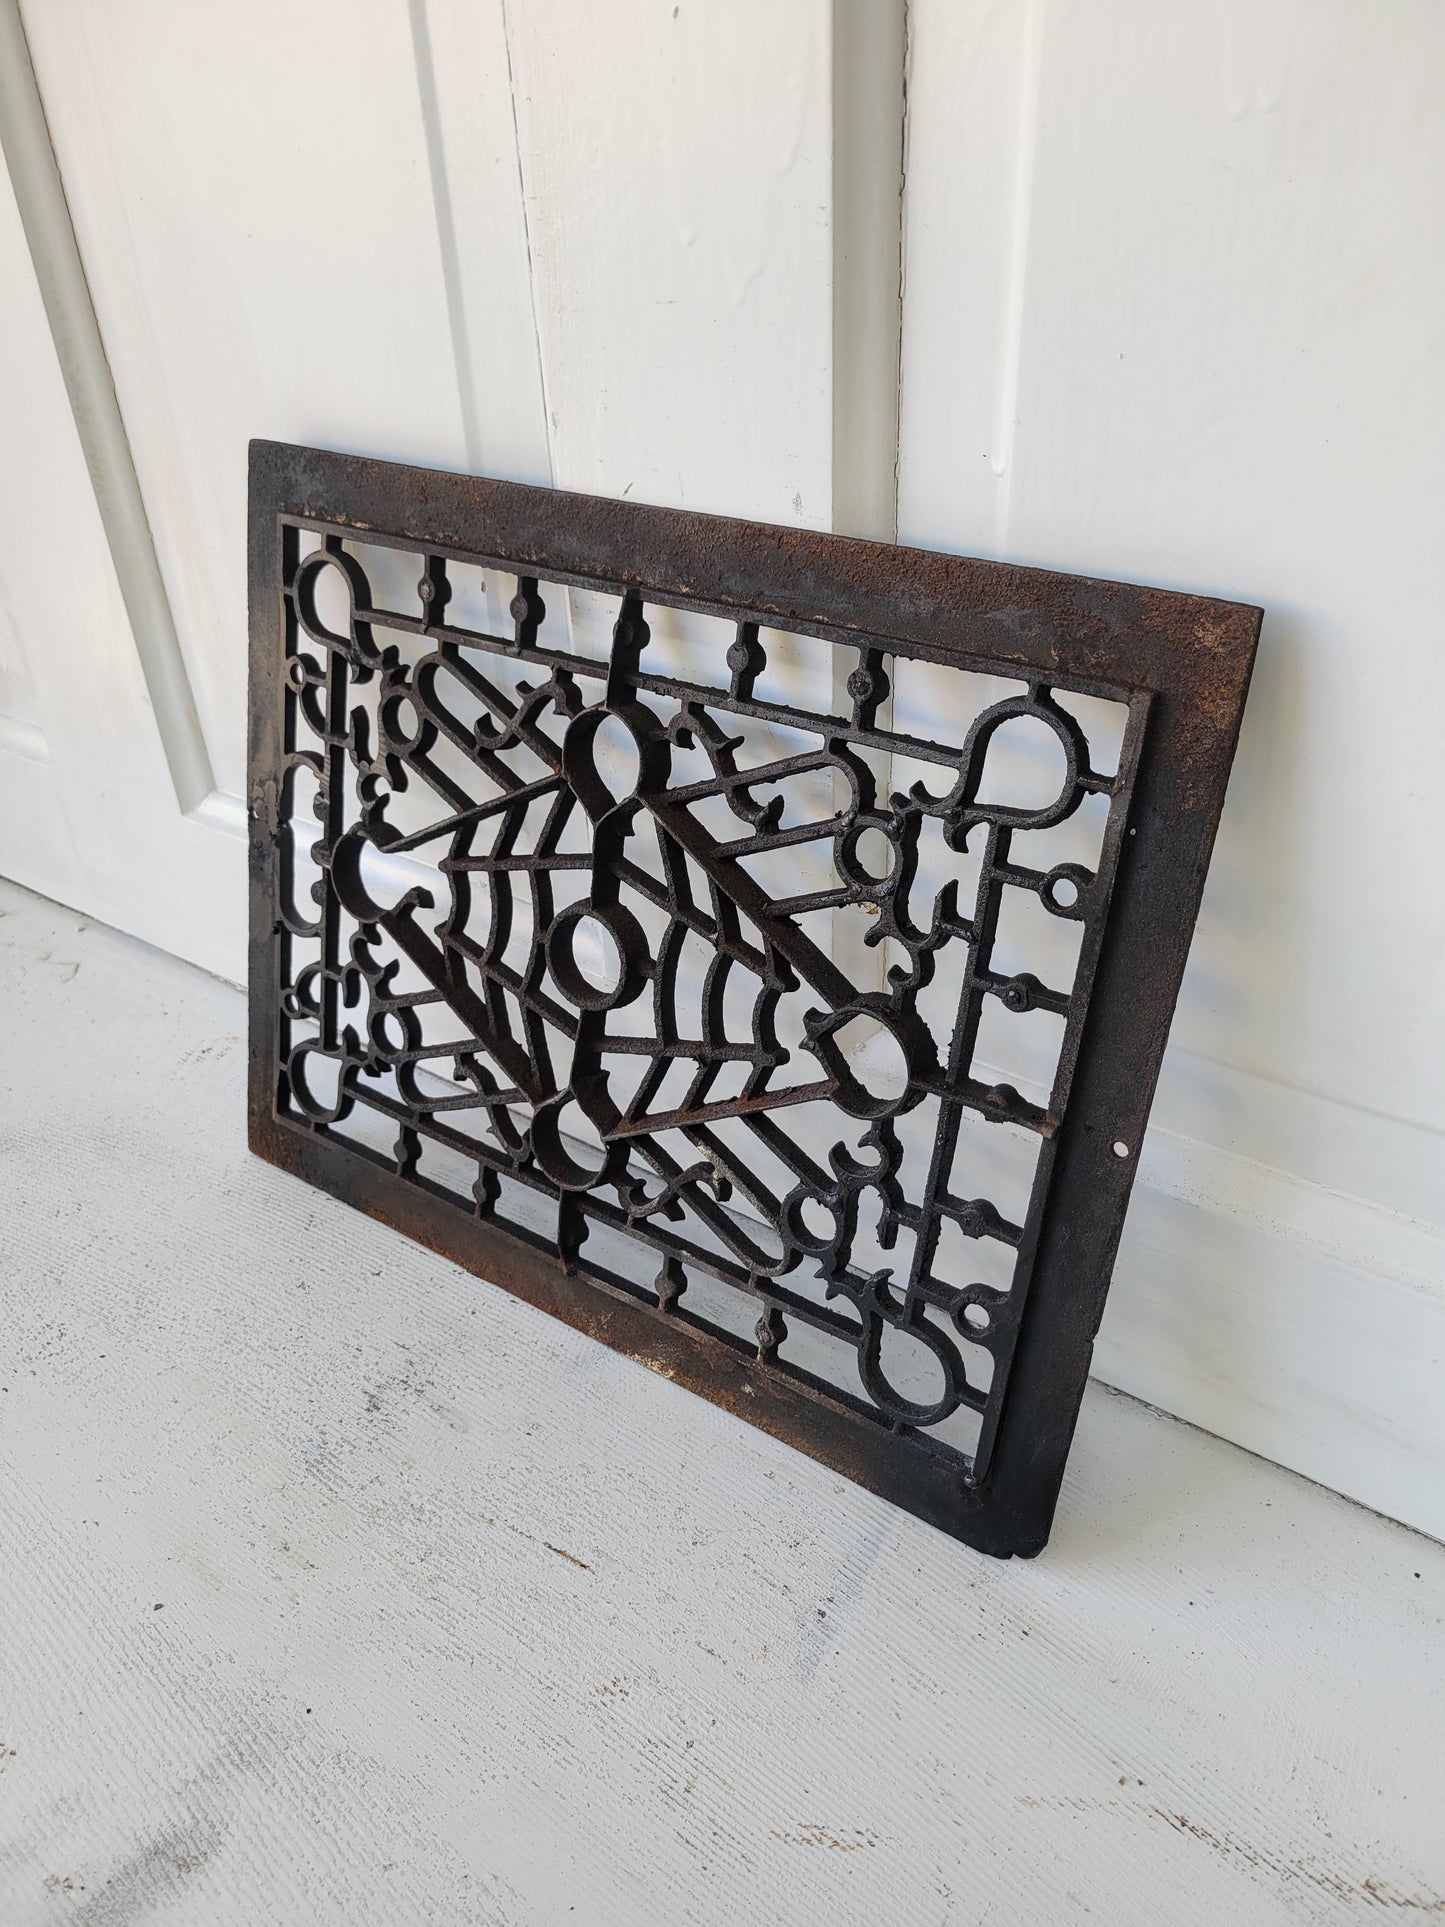 Antique 11 x 14 Fancy Cast Iron Vent Cover, Floor or Wall Mount Heat Register Grate #061203